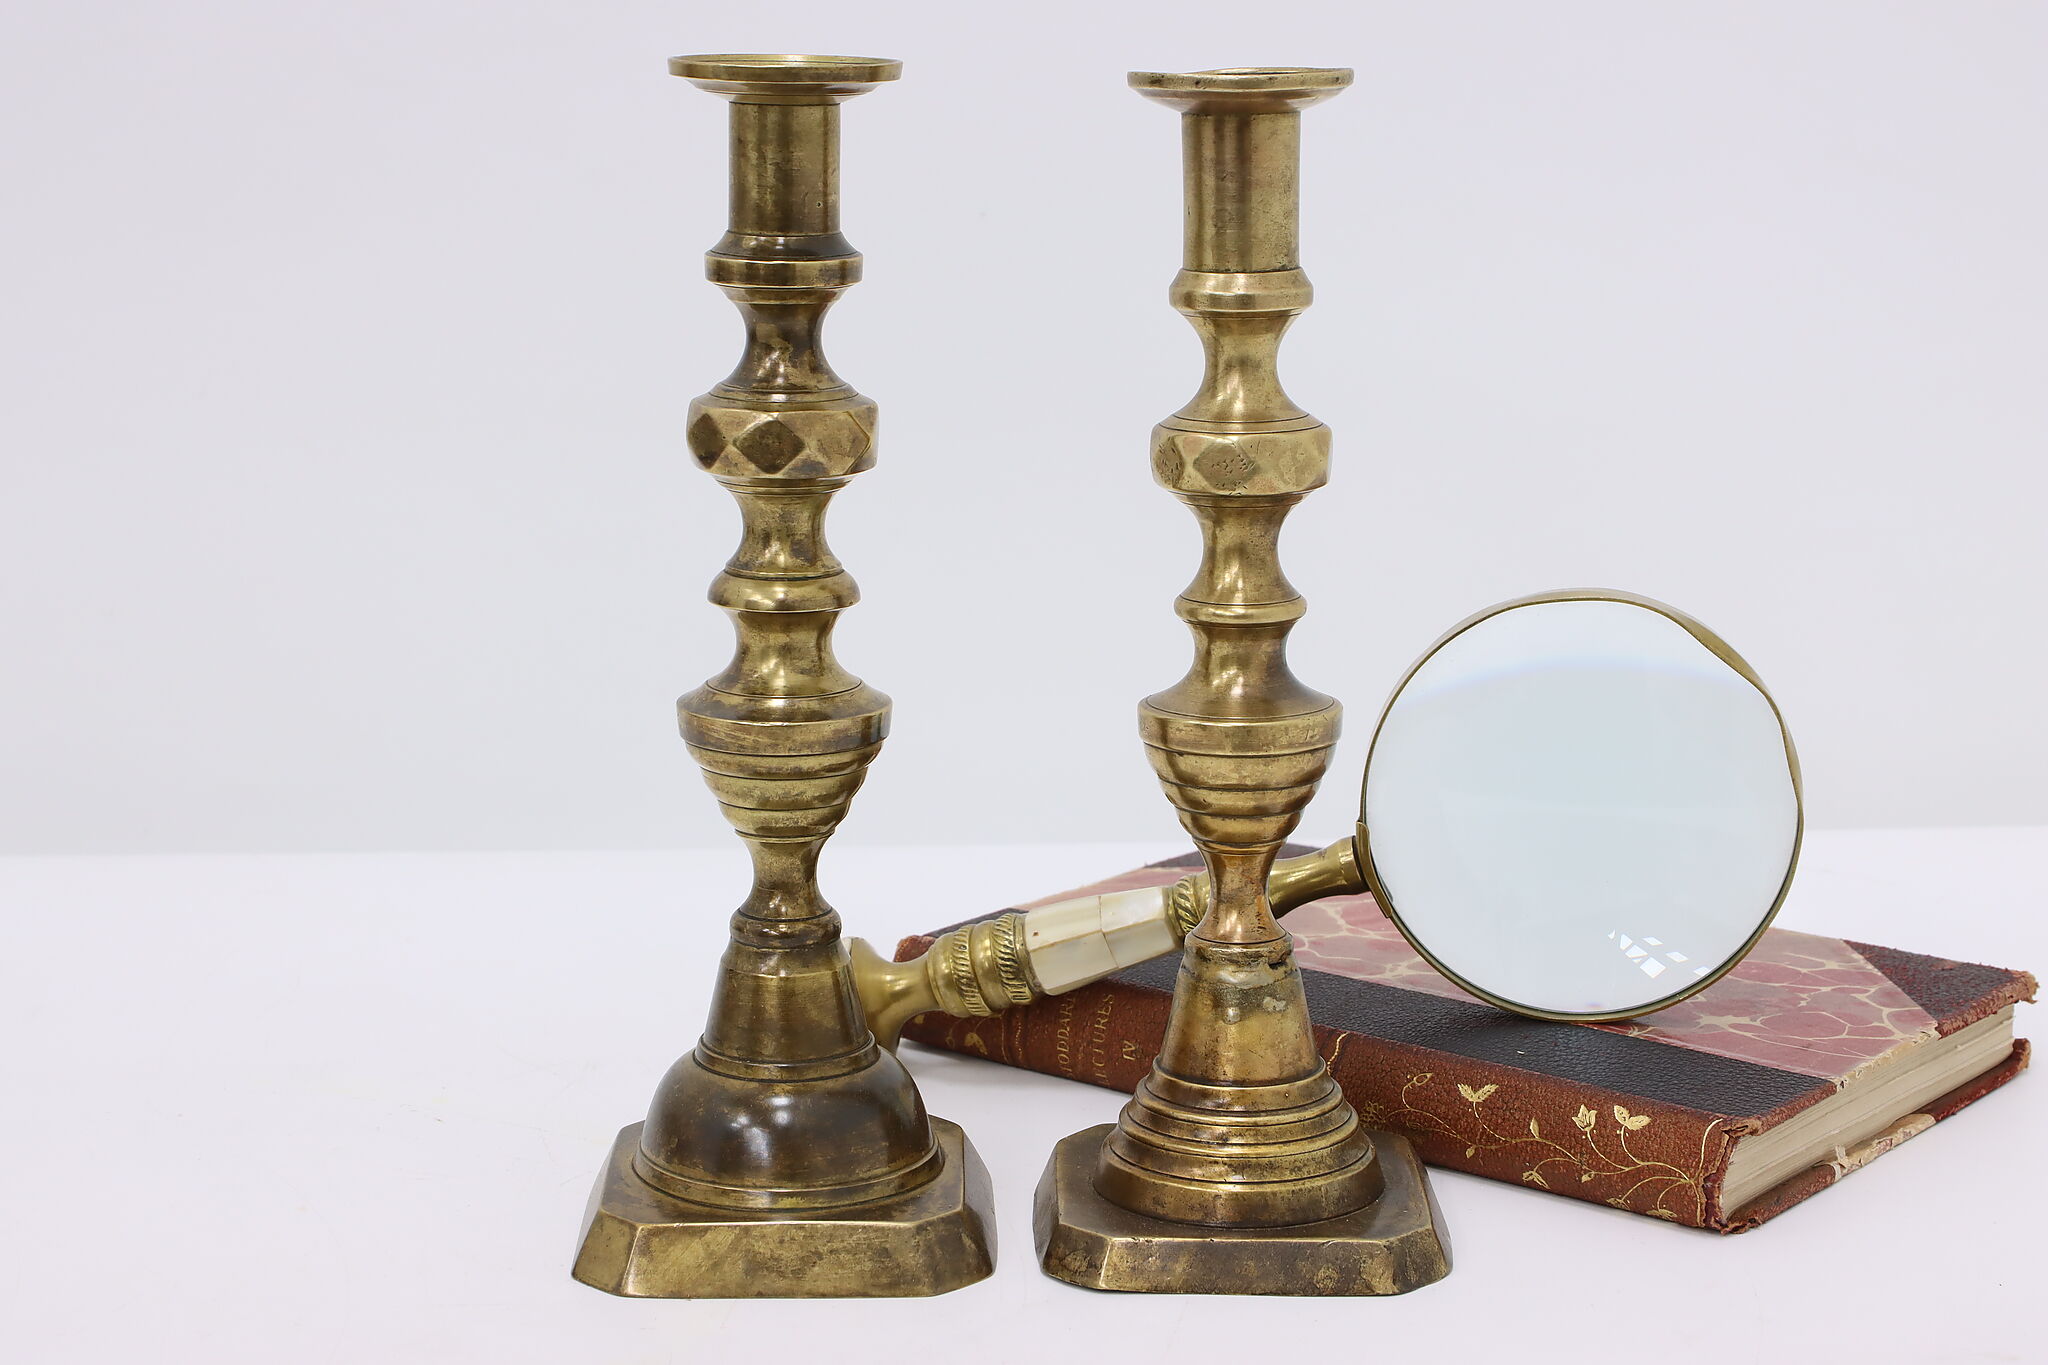 English Victorian Antique BRASS CANDLESTICKS Late 19th Century (Set of 4)